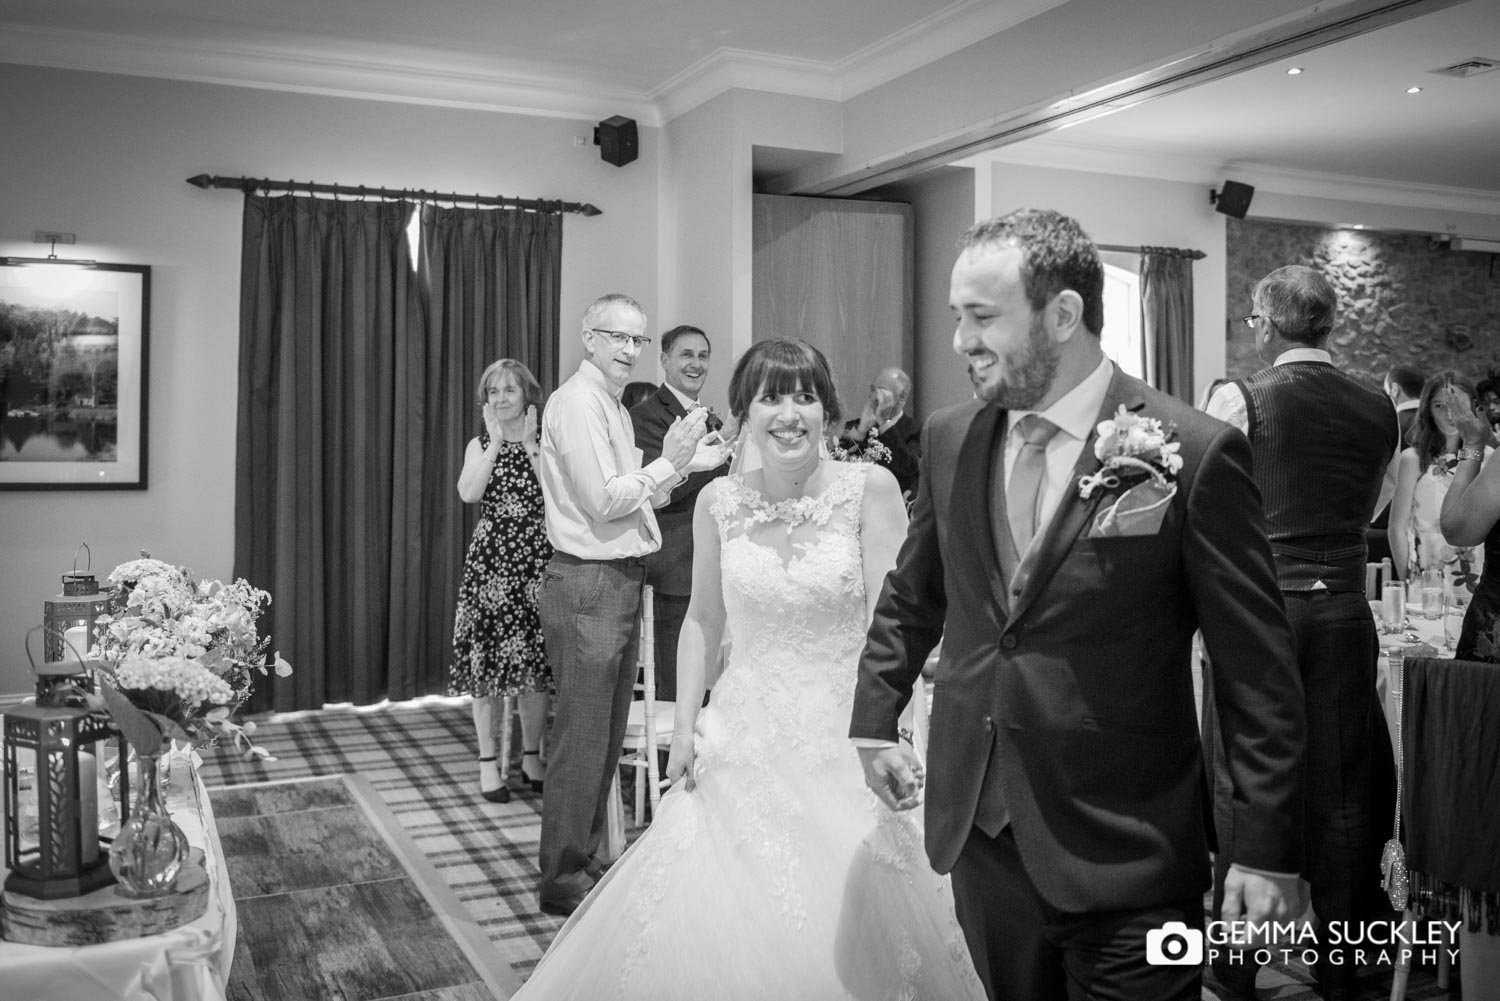 the bride and groom entering the room at coniston hotel to cheering guests